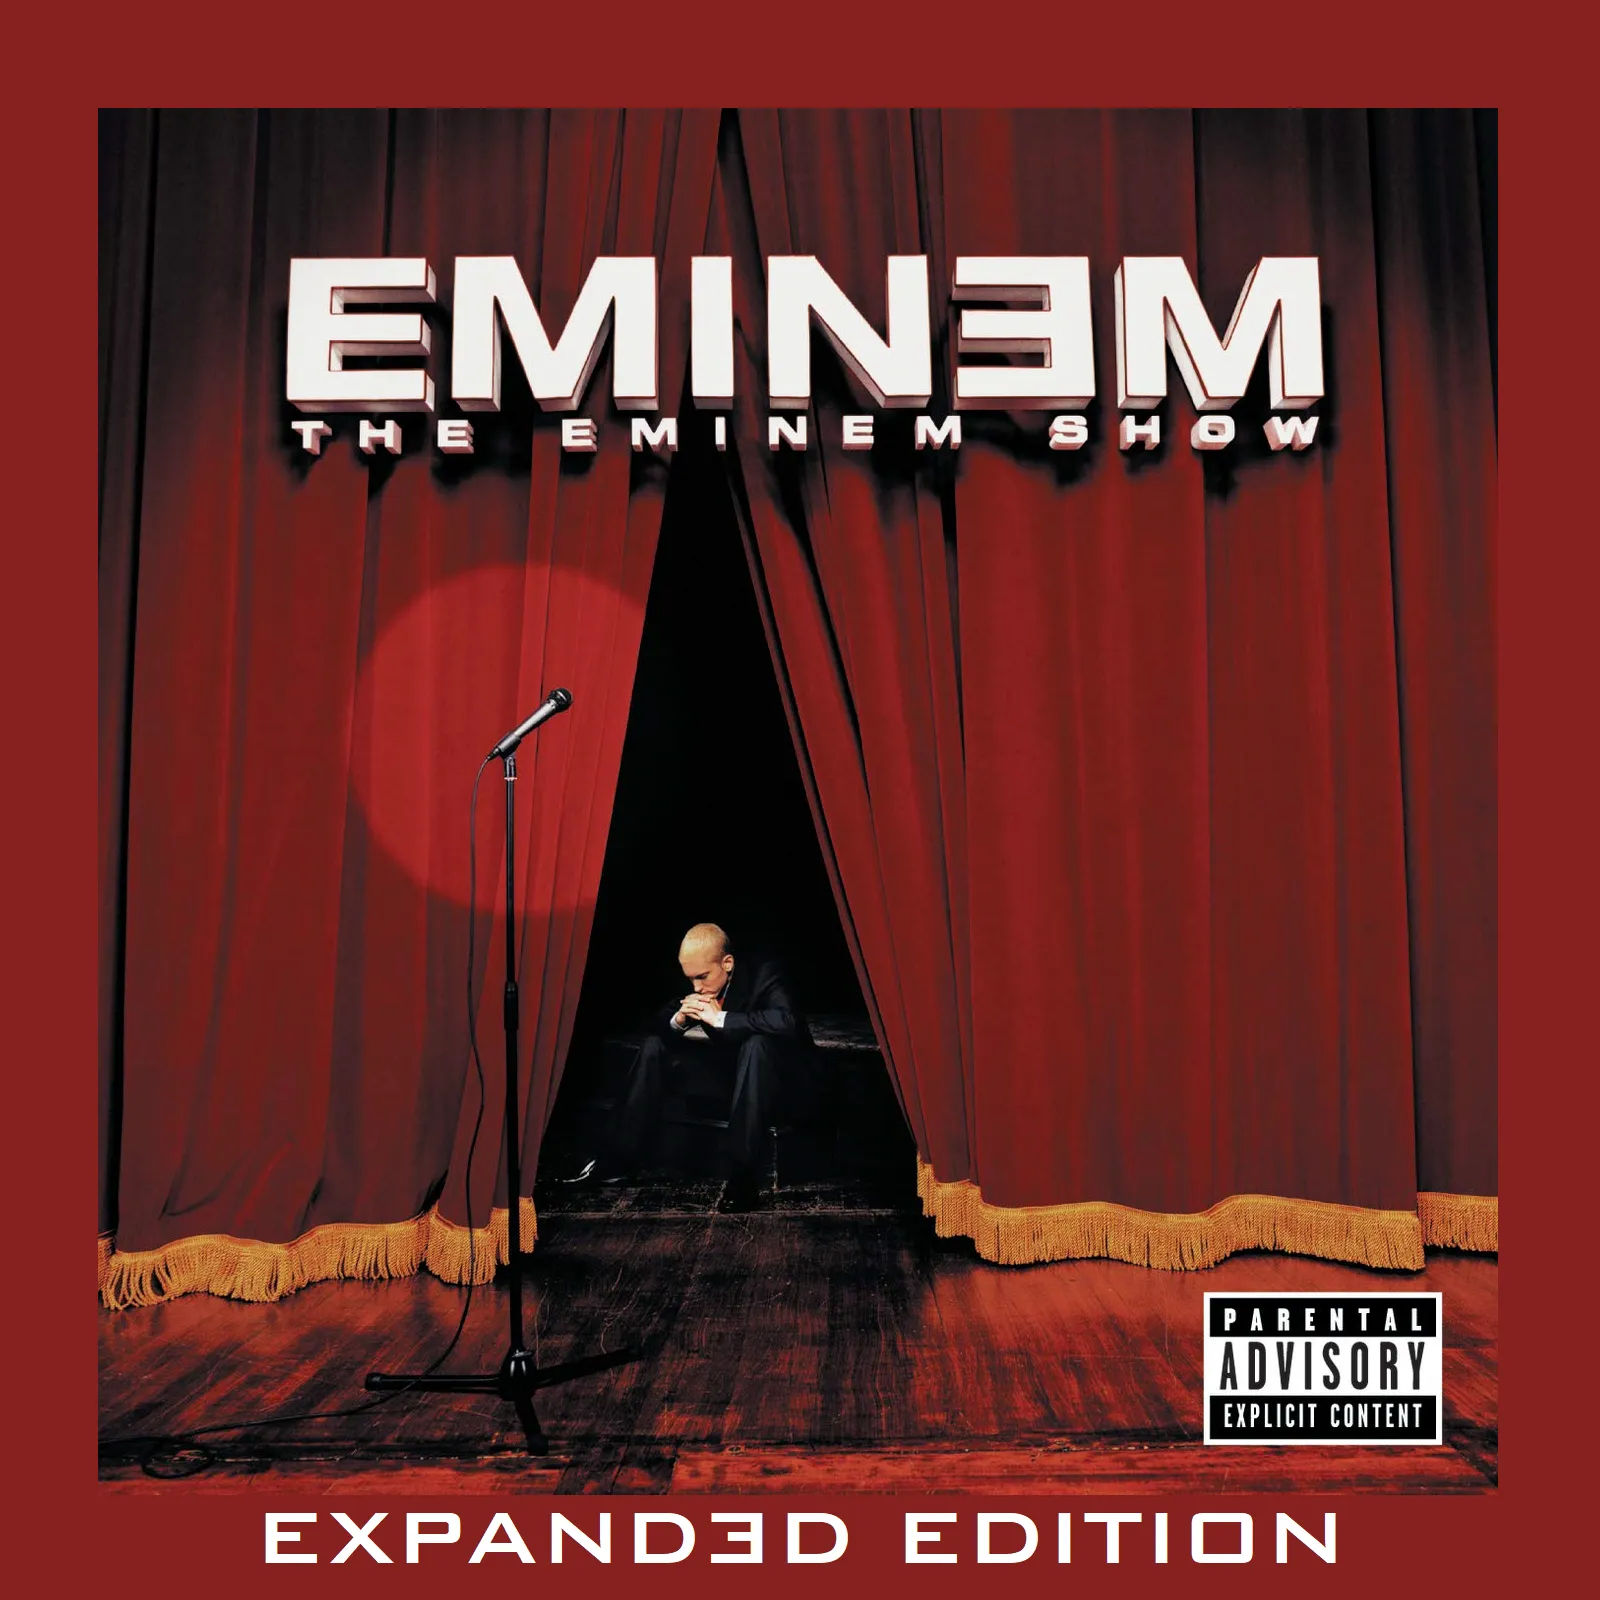 The Eminem Show 20th Anniversary Expanded Edition